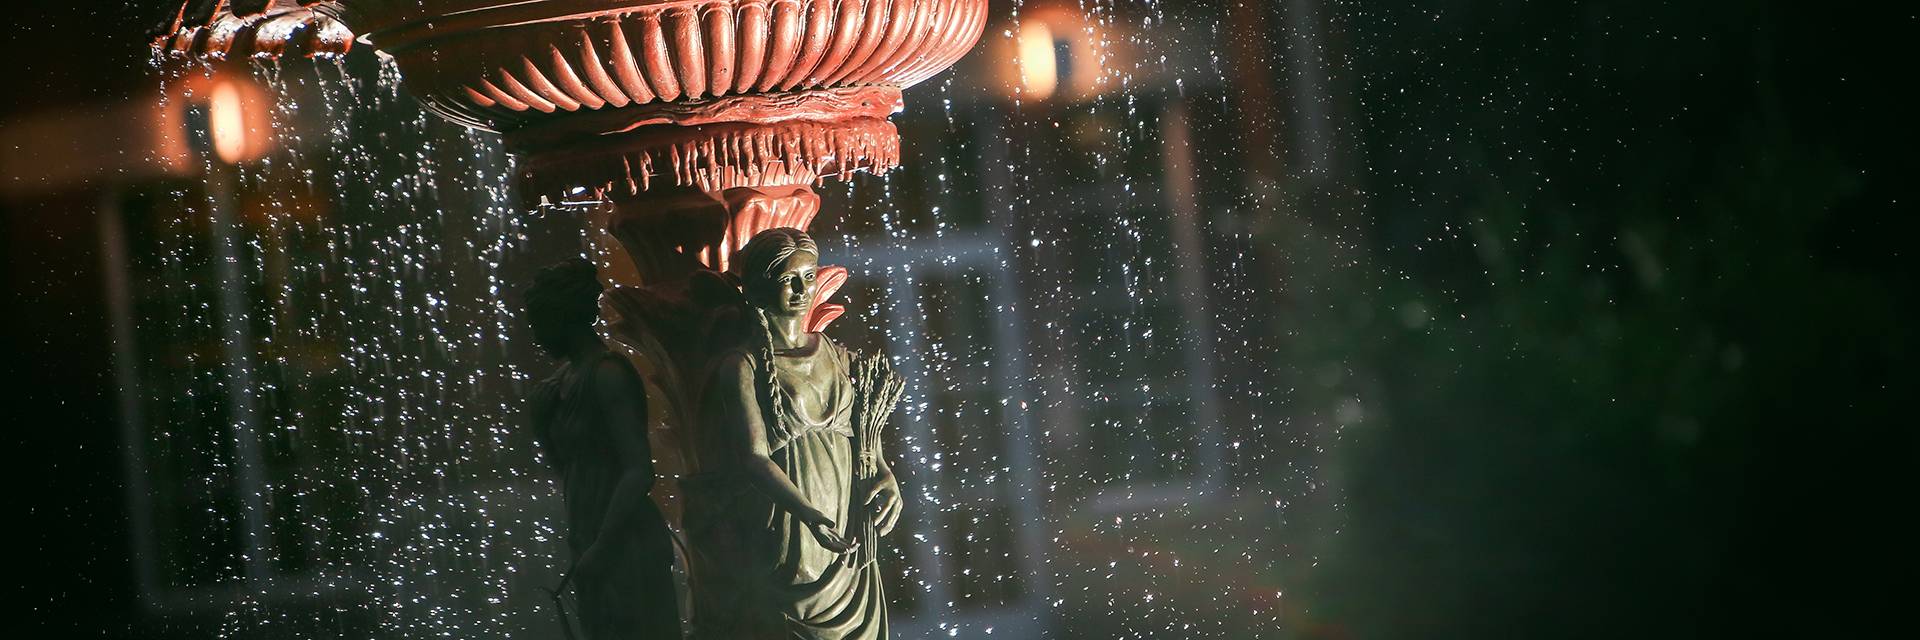 The Adelphi Fountain at UND, featuring a bronze figure against the red center pedestal, water droplets falling around the figure